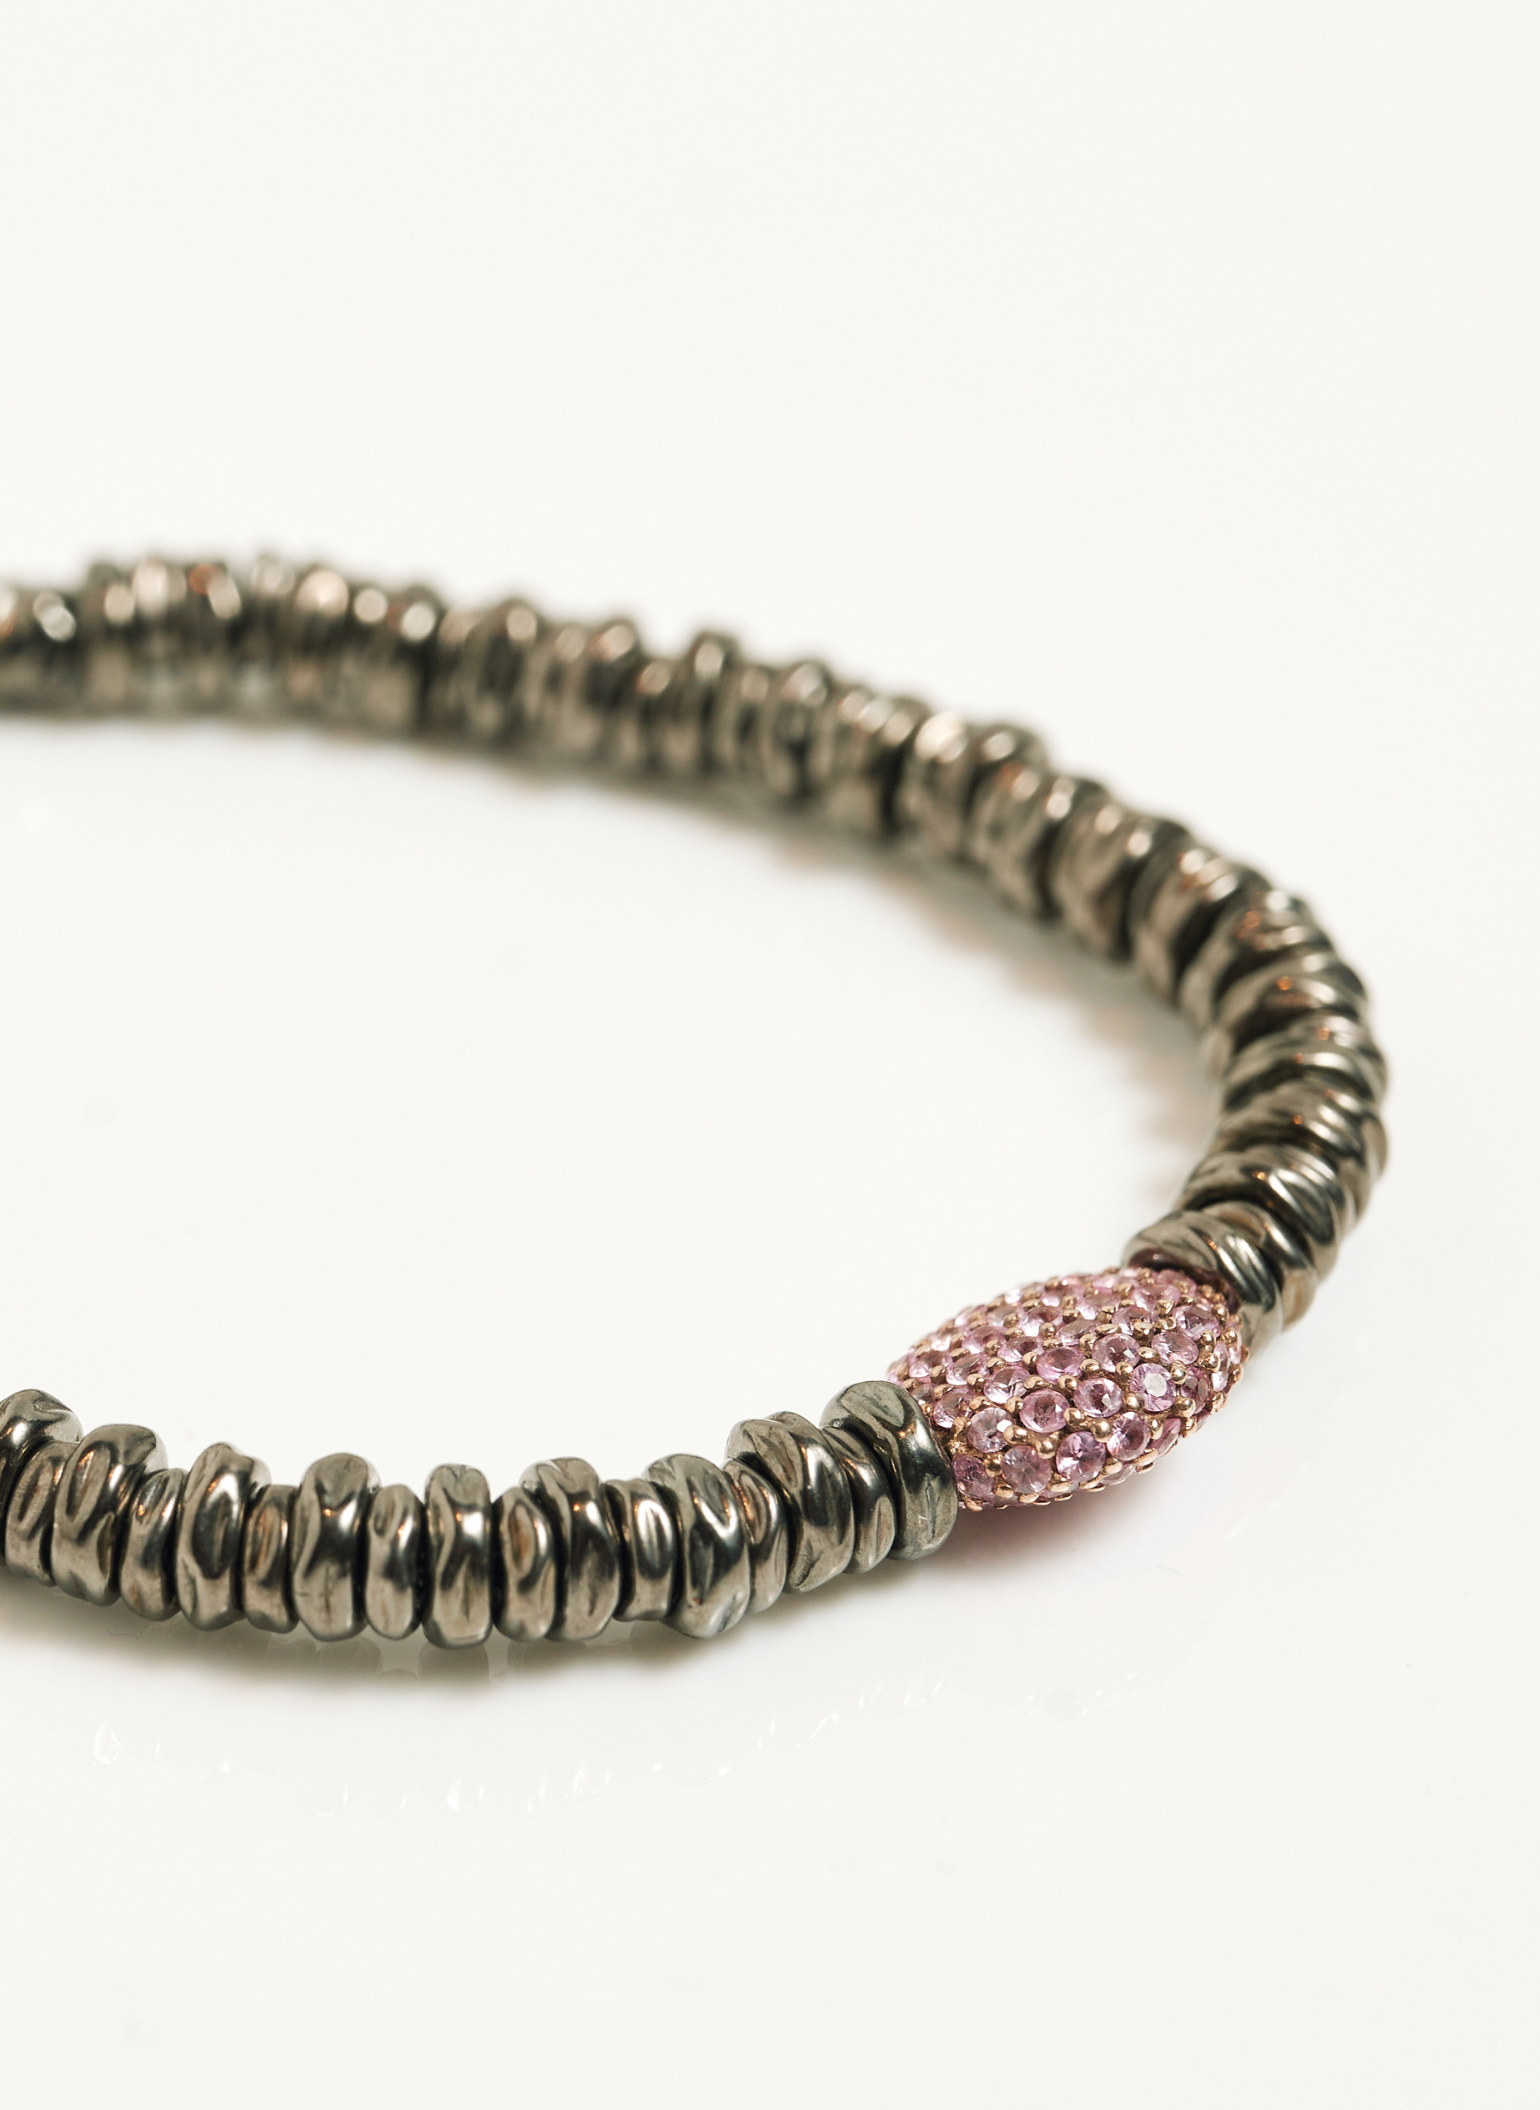 Pink Sapphire and Spinel Bracelet